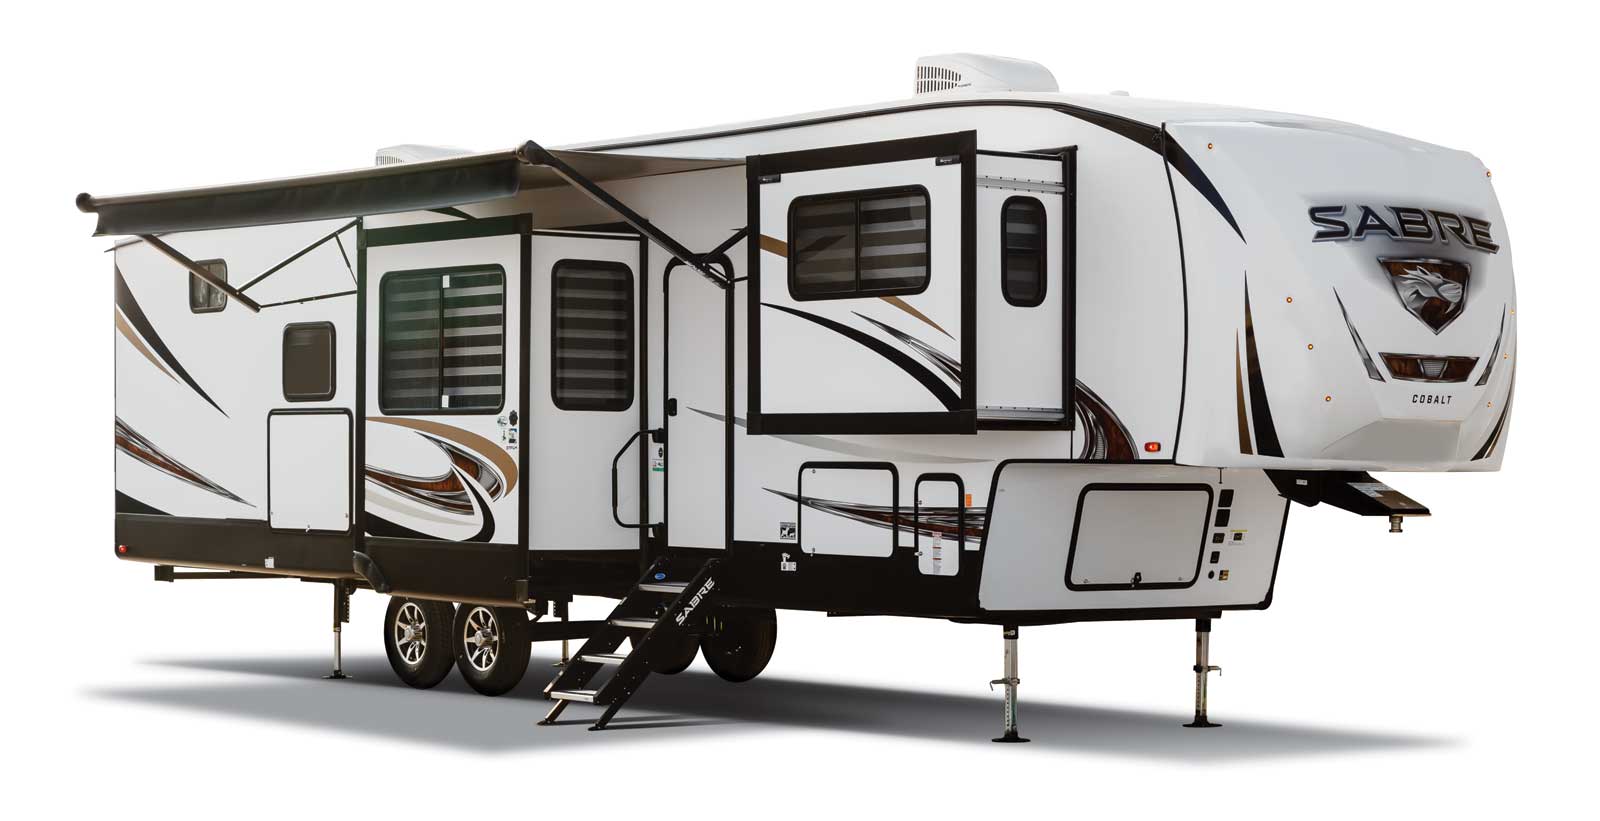 KZ RV Durango Fifth Wheel for sale in Wagner's Outdoor Express RV, Falling Waters, West Virginia